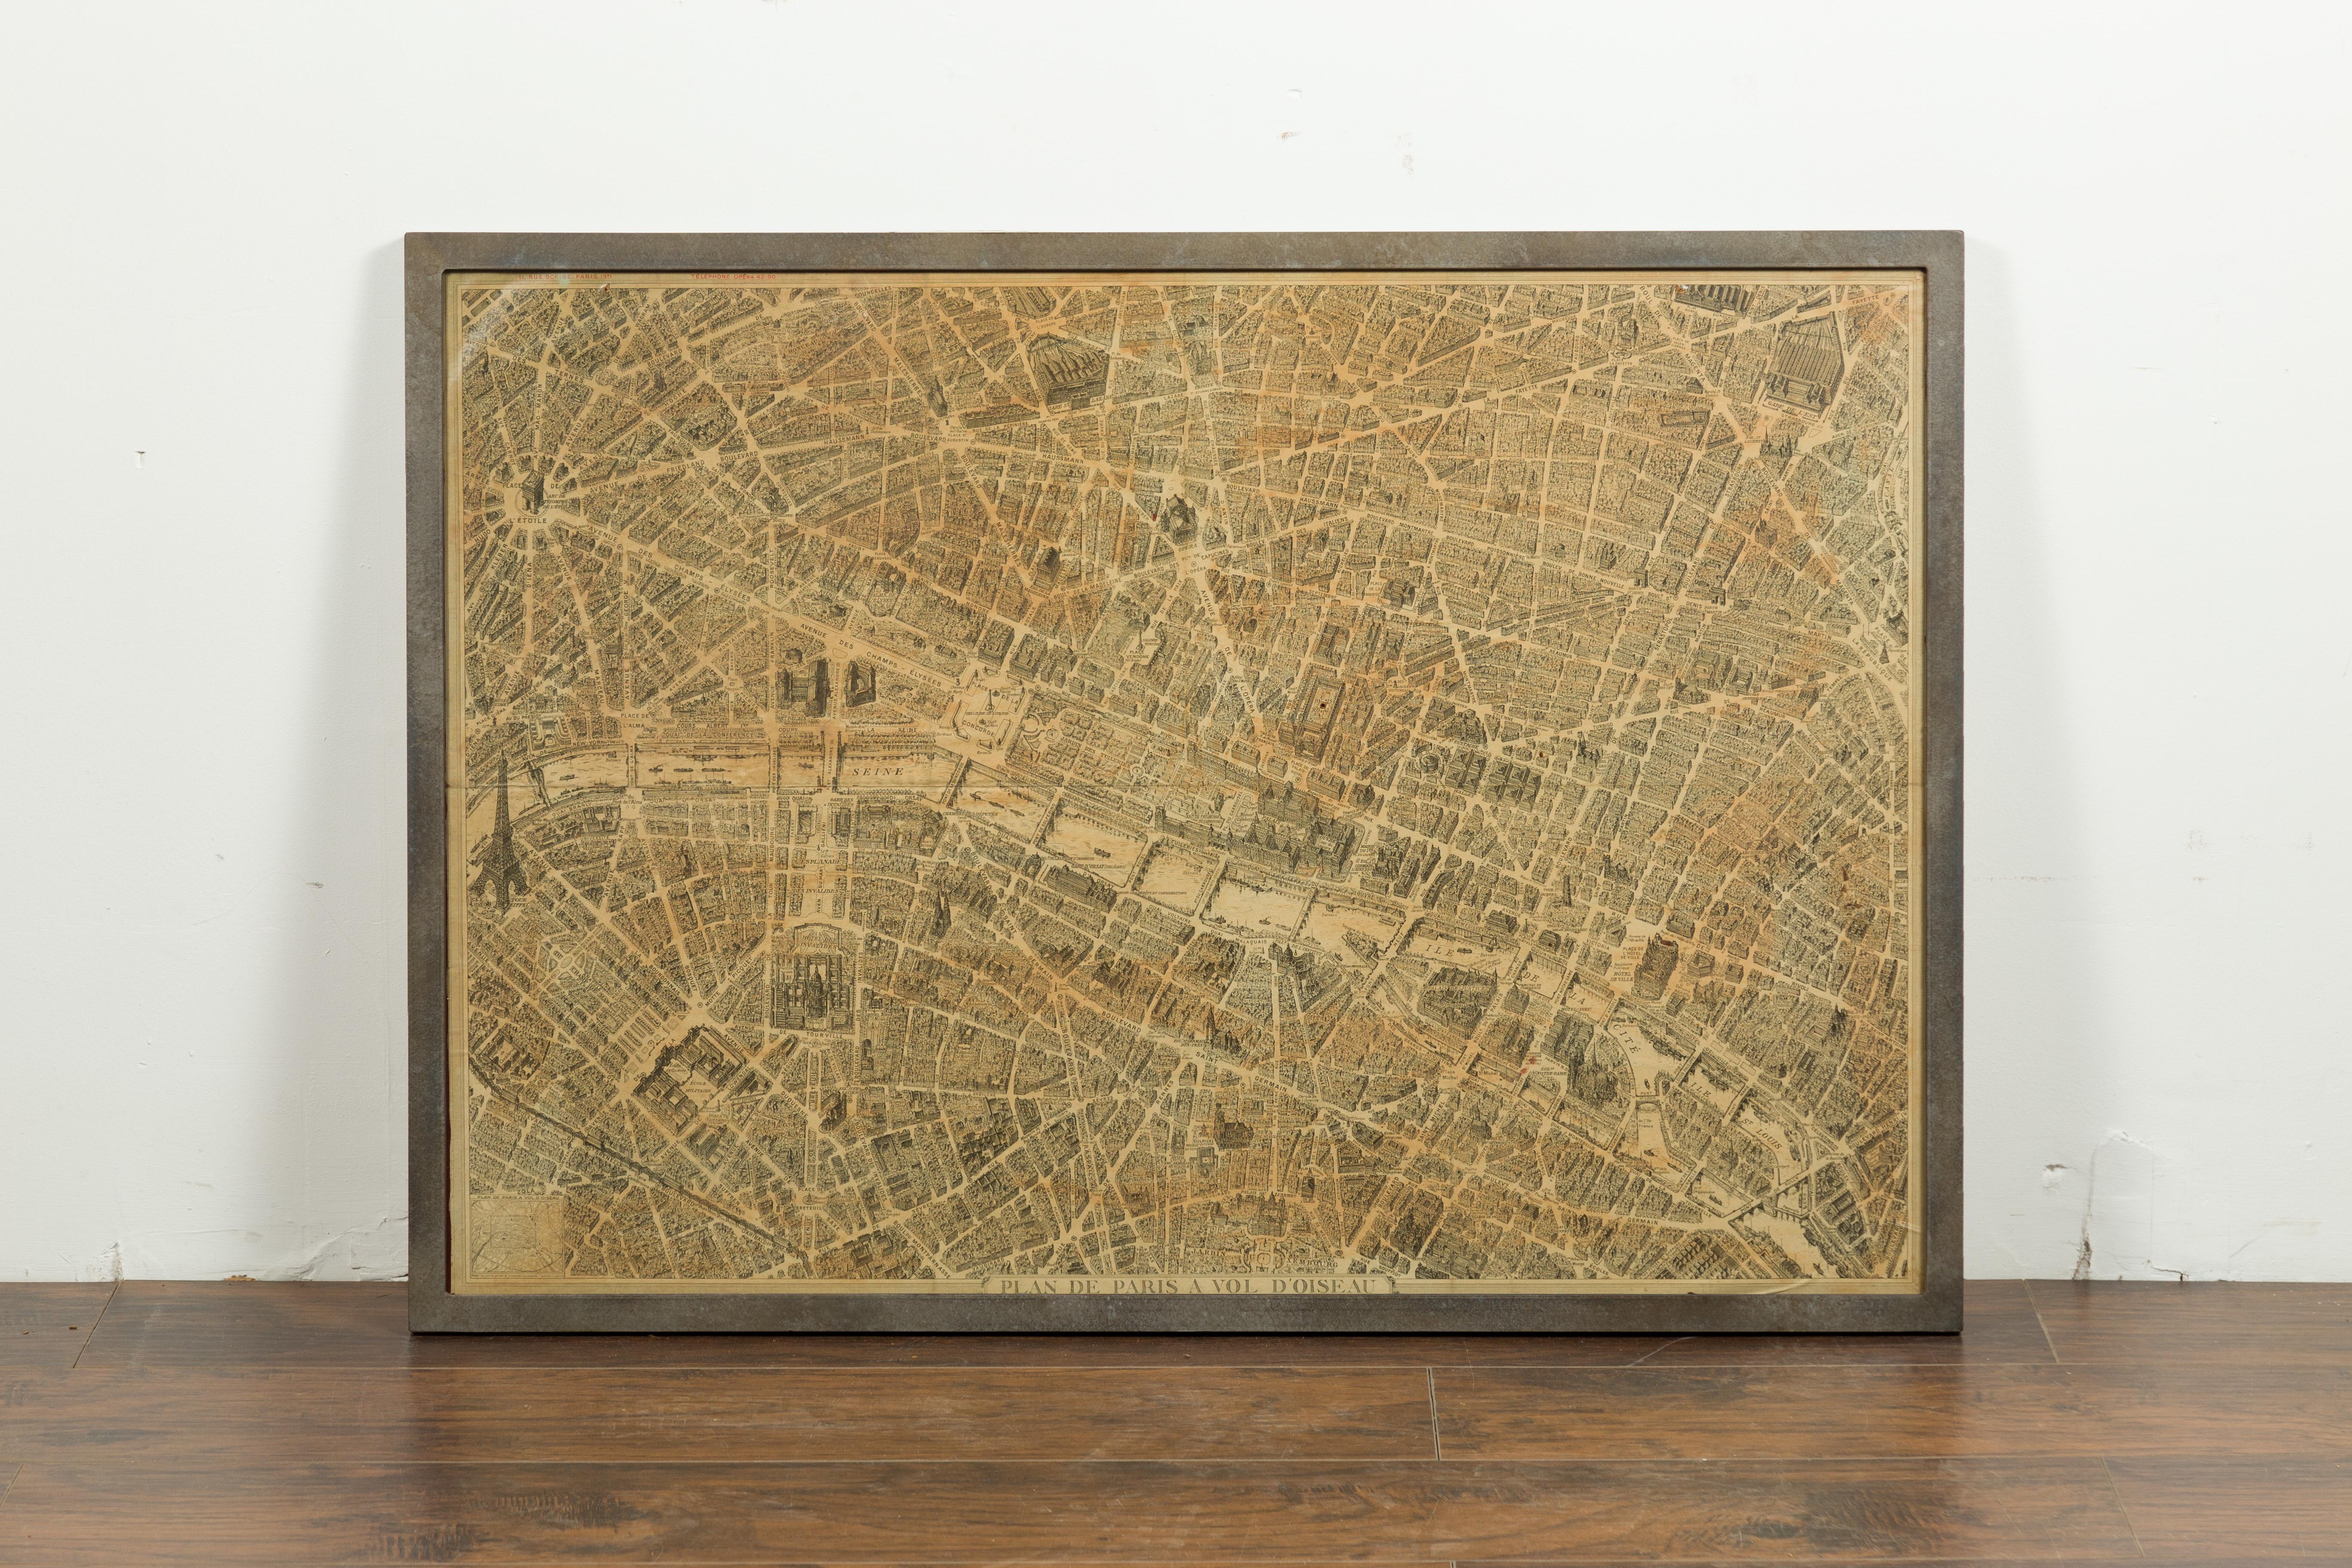 A French map of Paris from the early 20th century, with custom iron frame. Created in Paris during the second quarter of the 20th century, this map of Paris à vol d'oiseau (as the Crow flies) features the City of Lights as it was pre 1950s. The